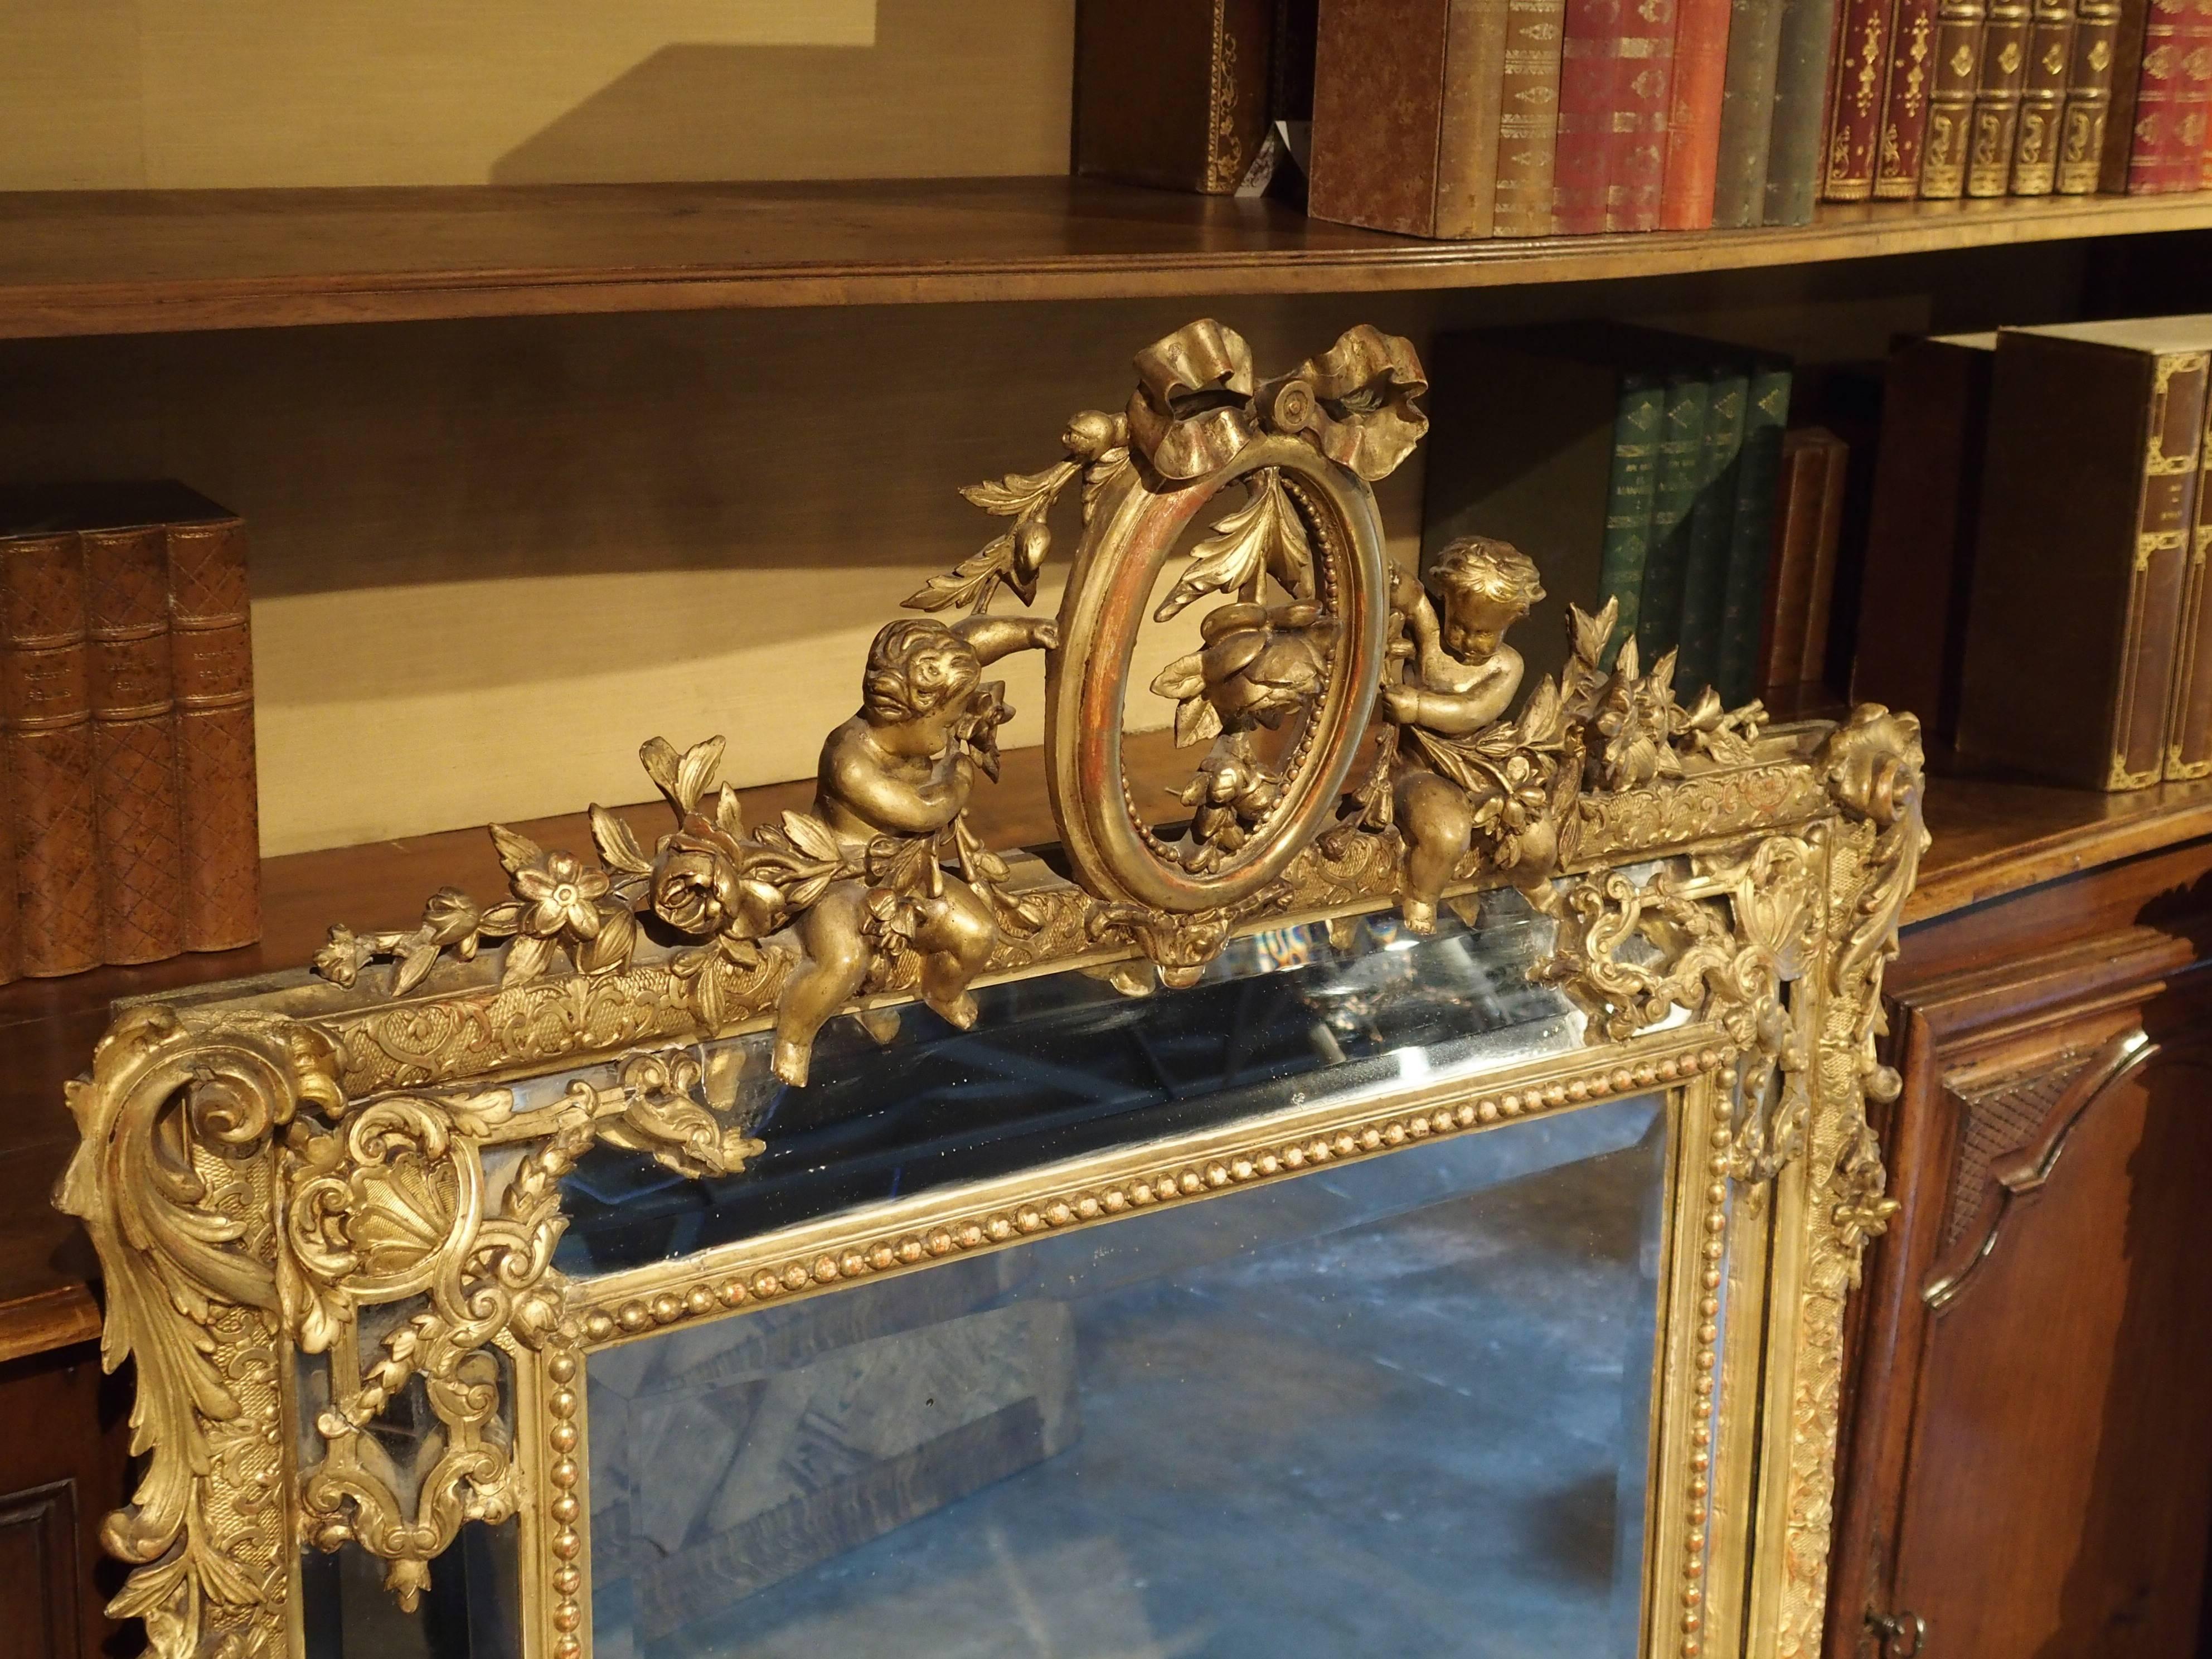 This elegant, antique French, giltwood, Louis XVI style mirror is called a Miroir a “Parcloses”. It has four canted side mirrored panels separated and held in place from the main center mirror by giltwood ornamentation. The unusual arrangement of